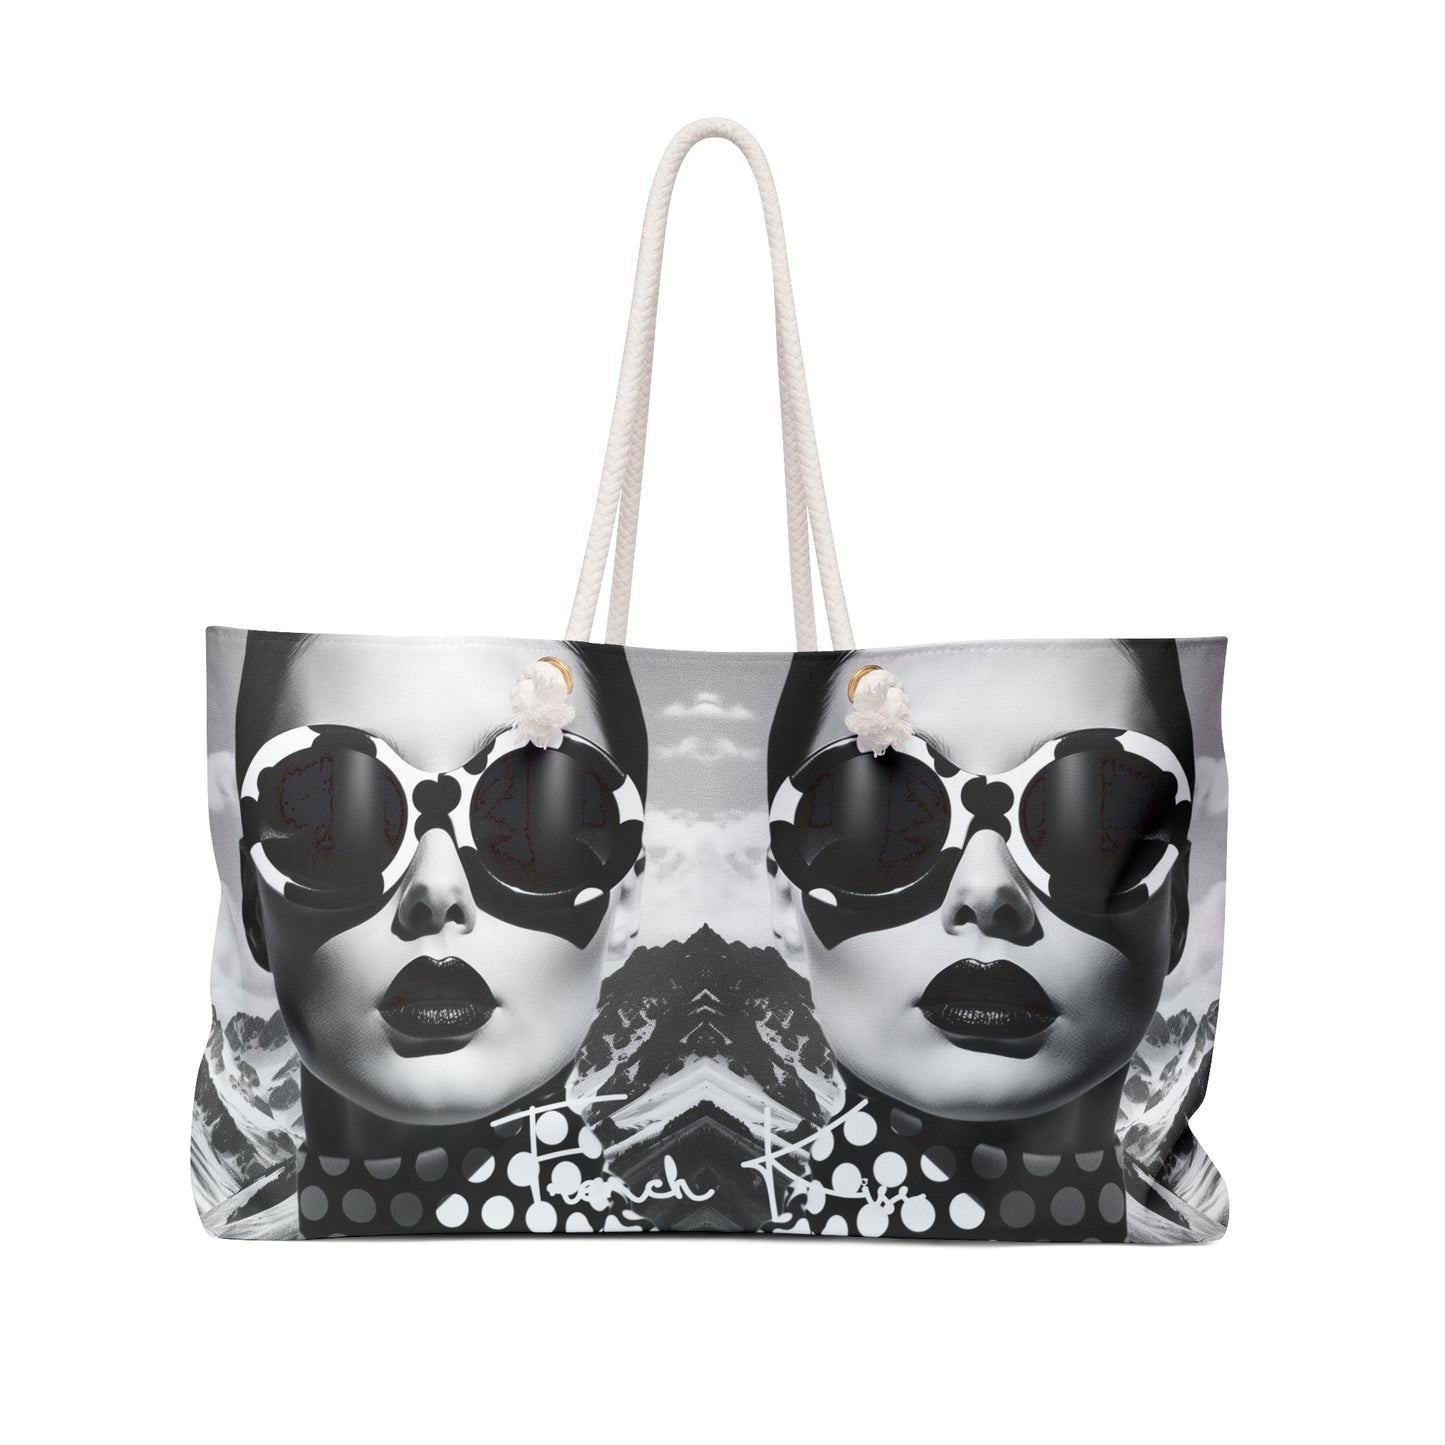 AVEC MOI Sassy Sexy Chic Weekender Accessory Bag French Kiss Pop Art, Classy, Couture, Travel, Fashion, Beauty gift item